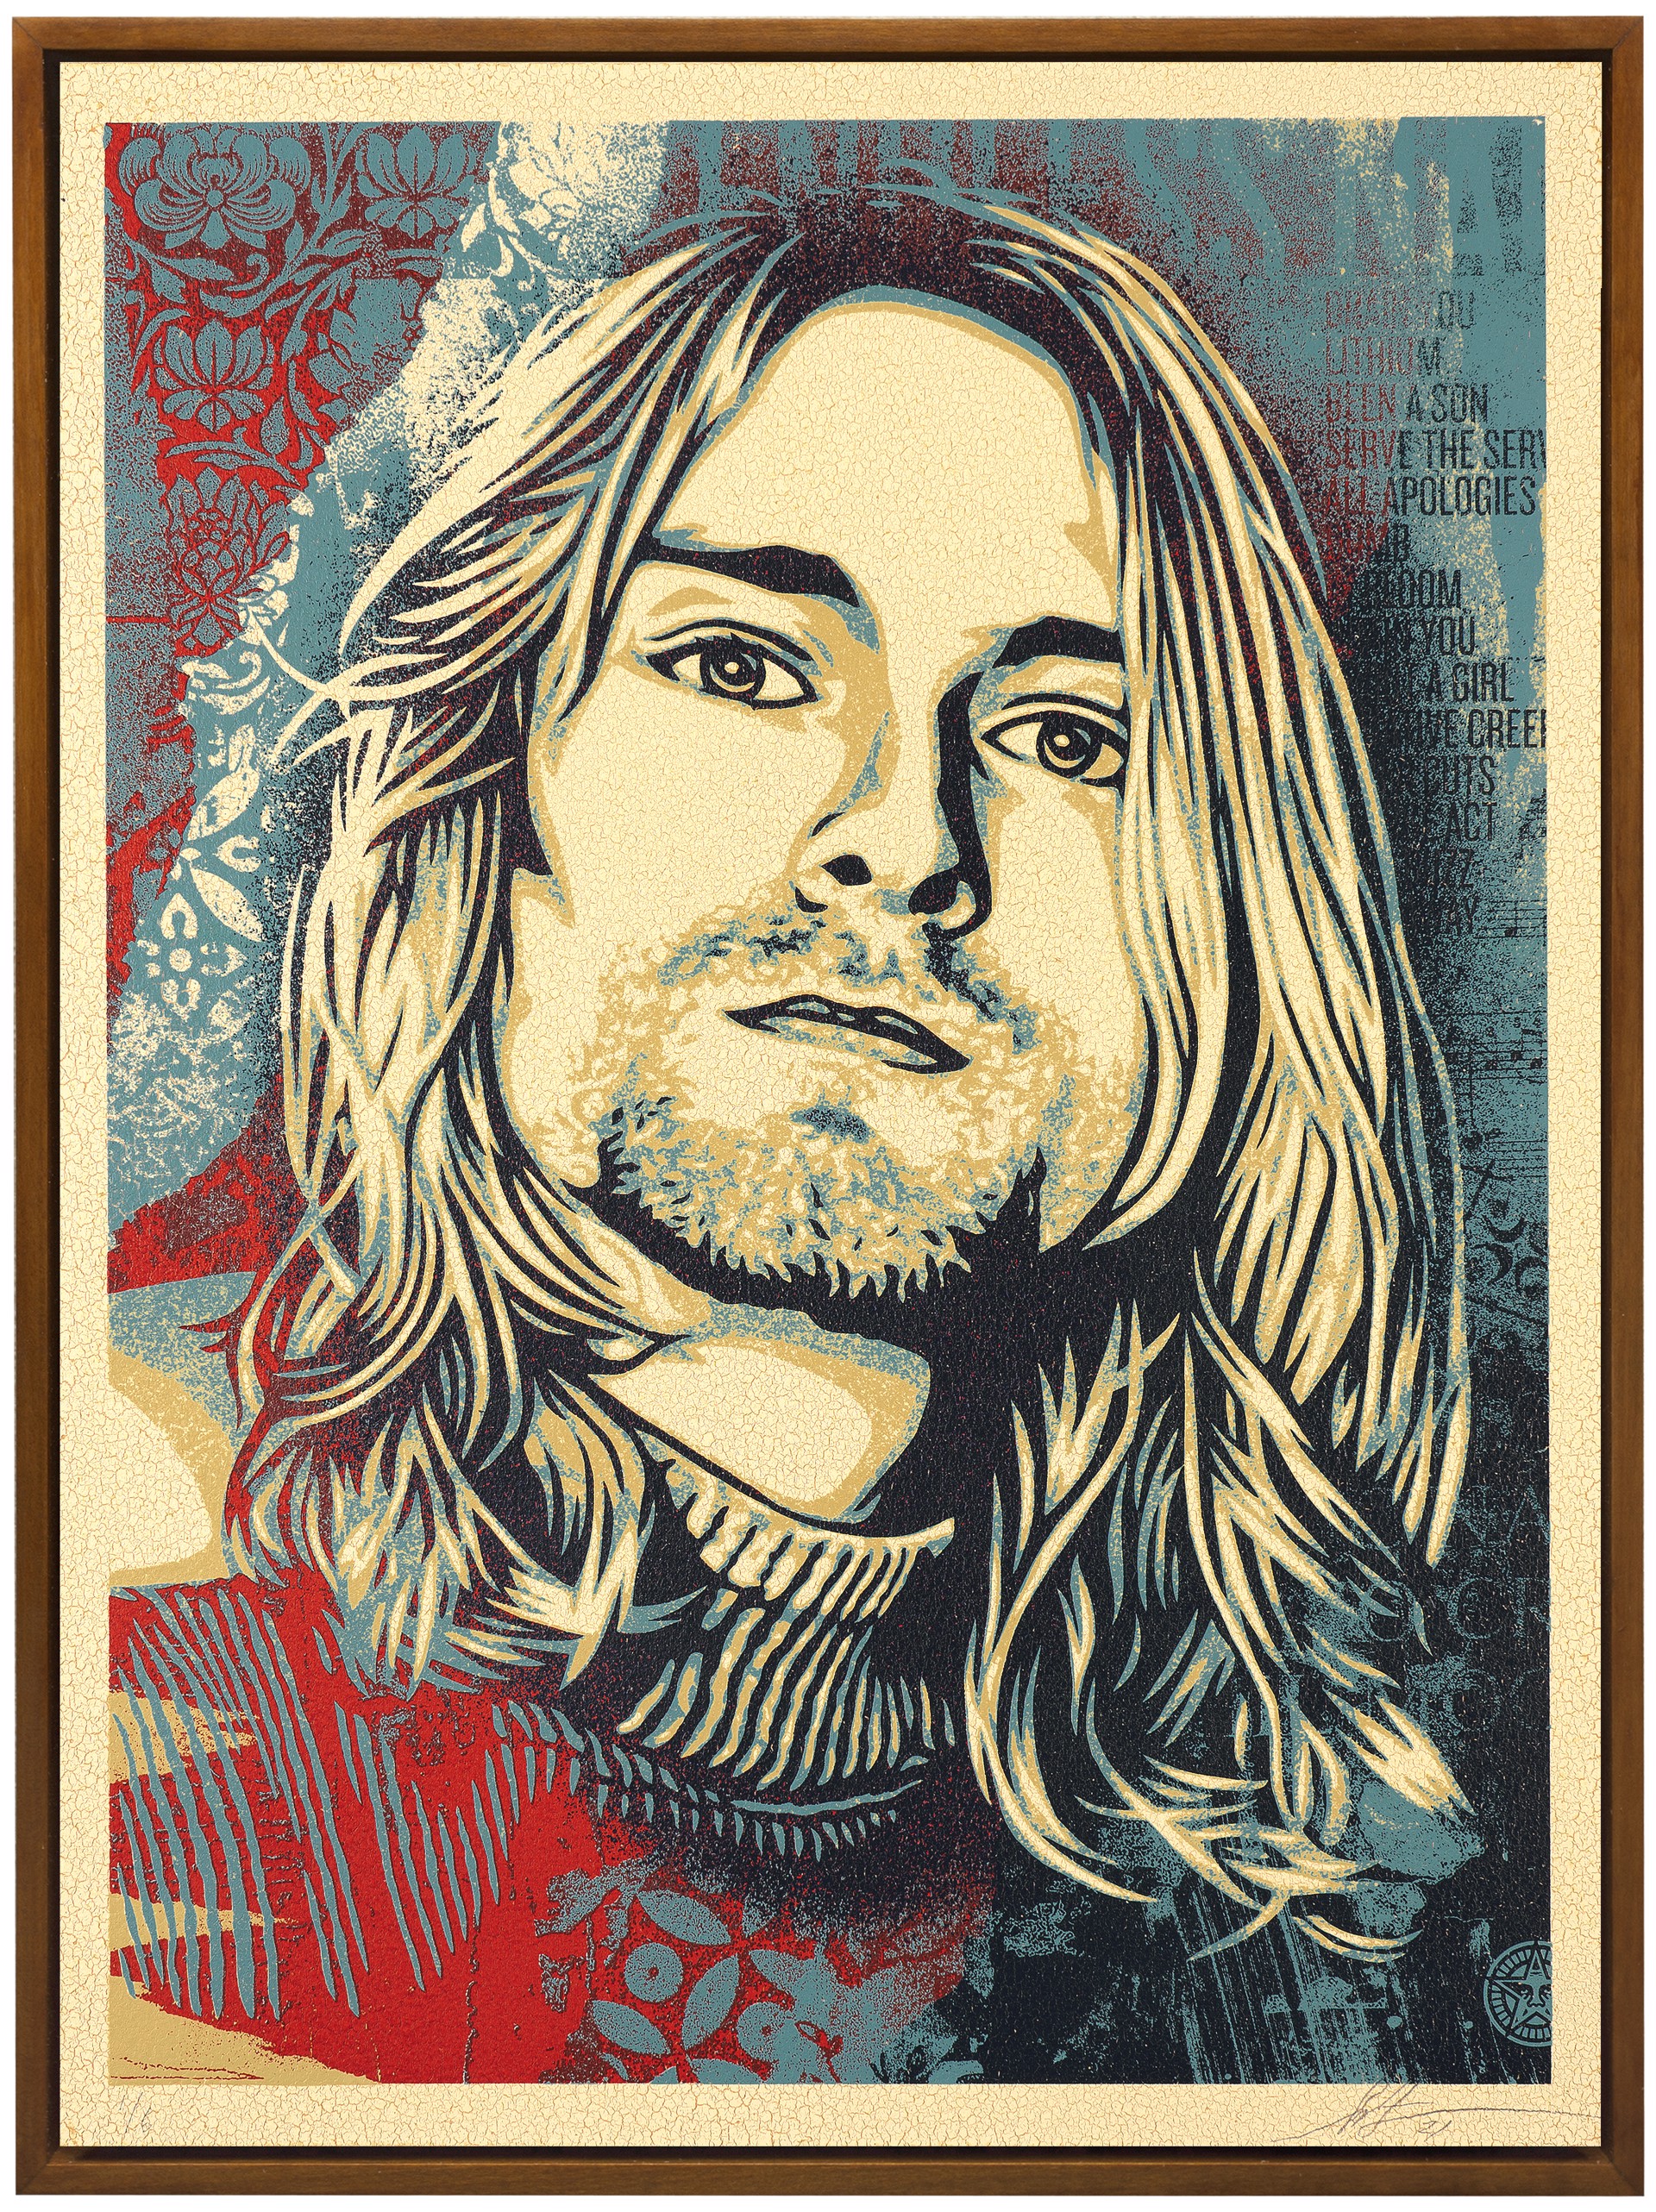 Kurt Cobain - Endless Nameless by Shepard Fairey / Limited editions